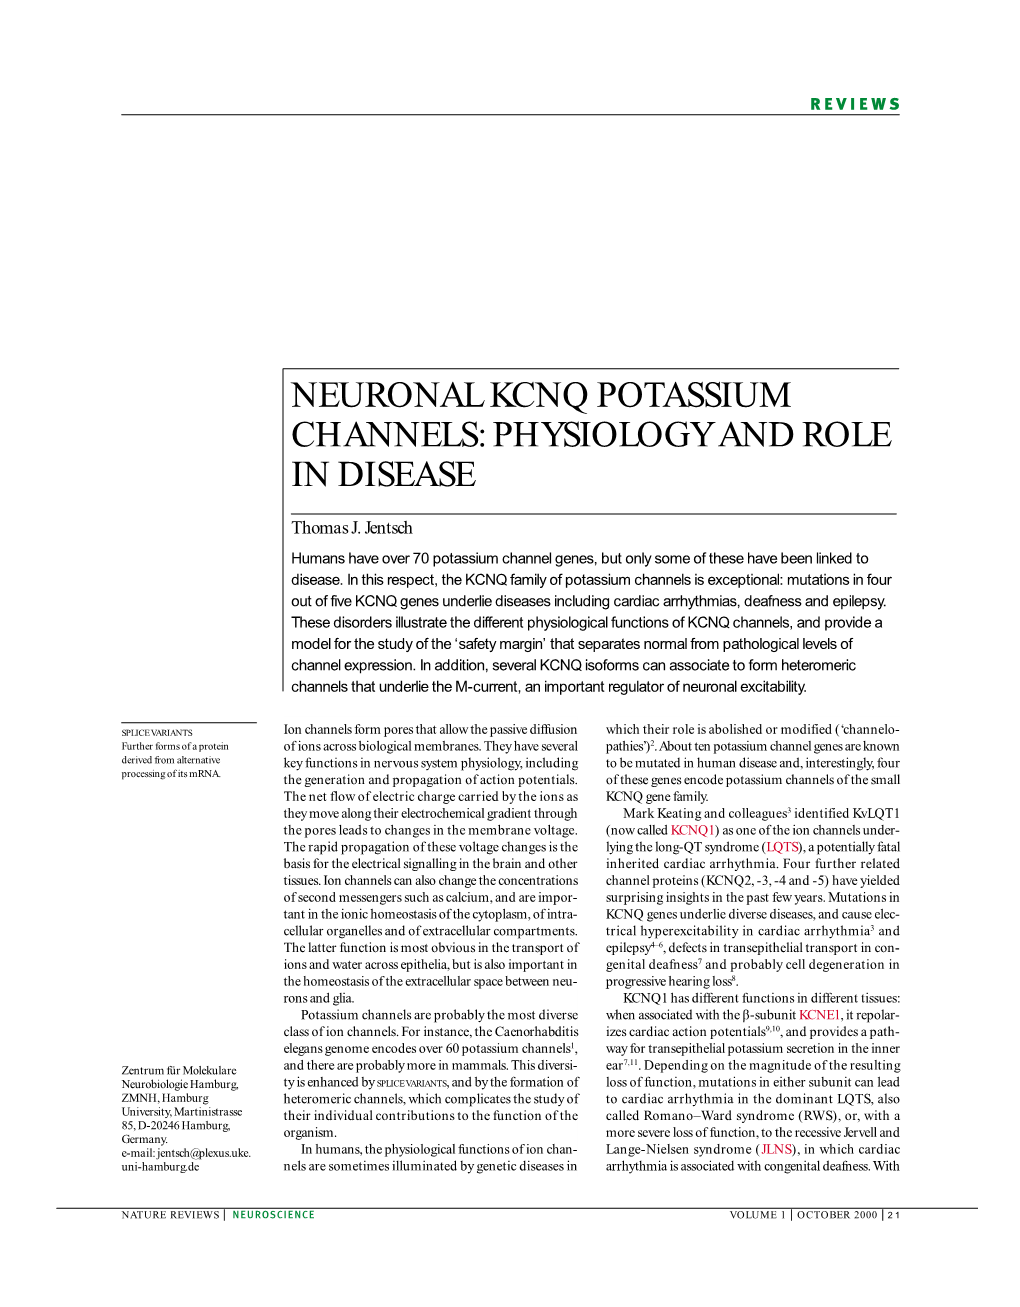 Neuronal Kcnq Potassium Channels: Physiology and Role in Disease